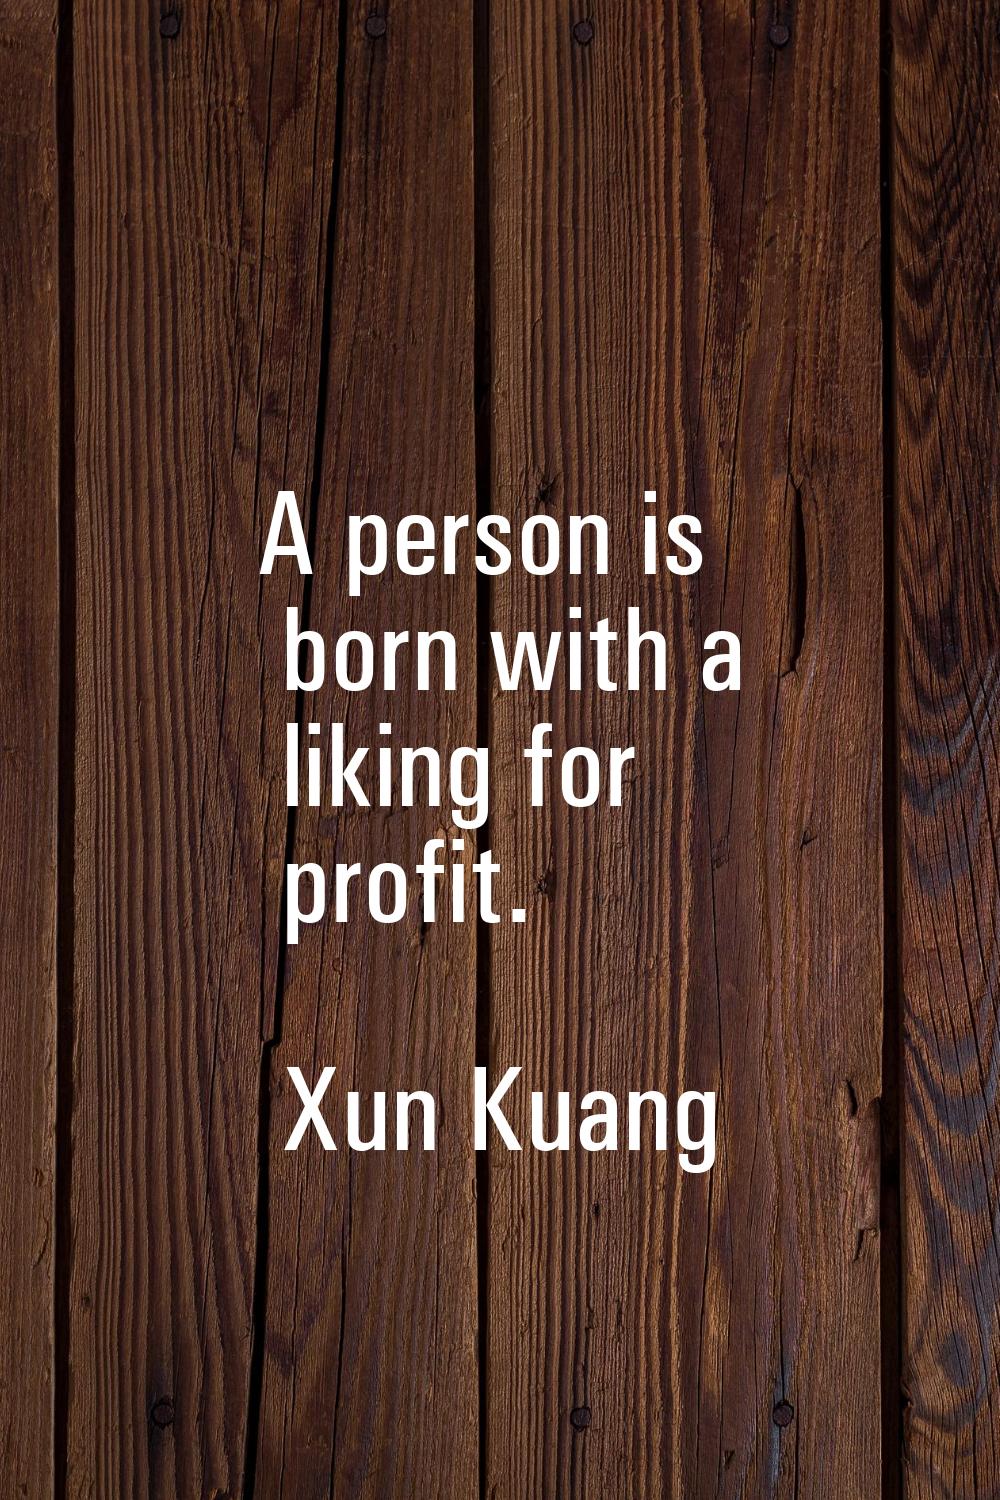 A person is born with a liking for profit.